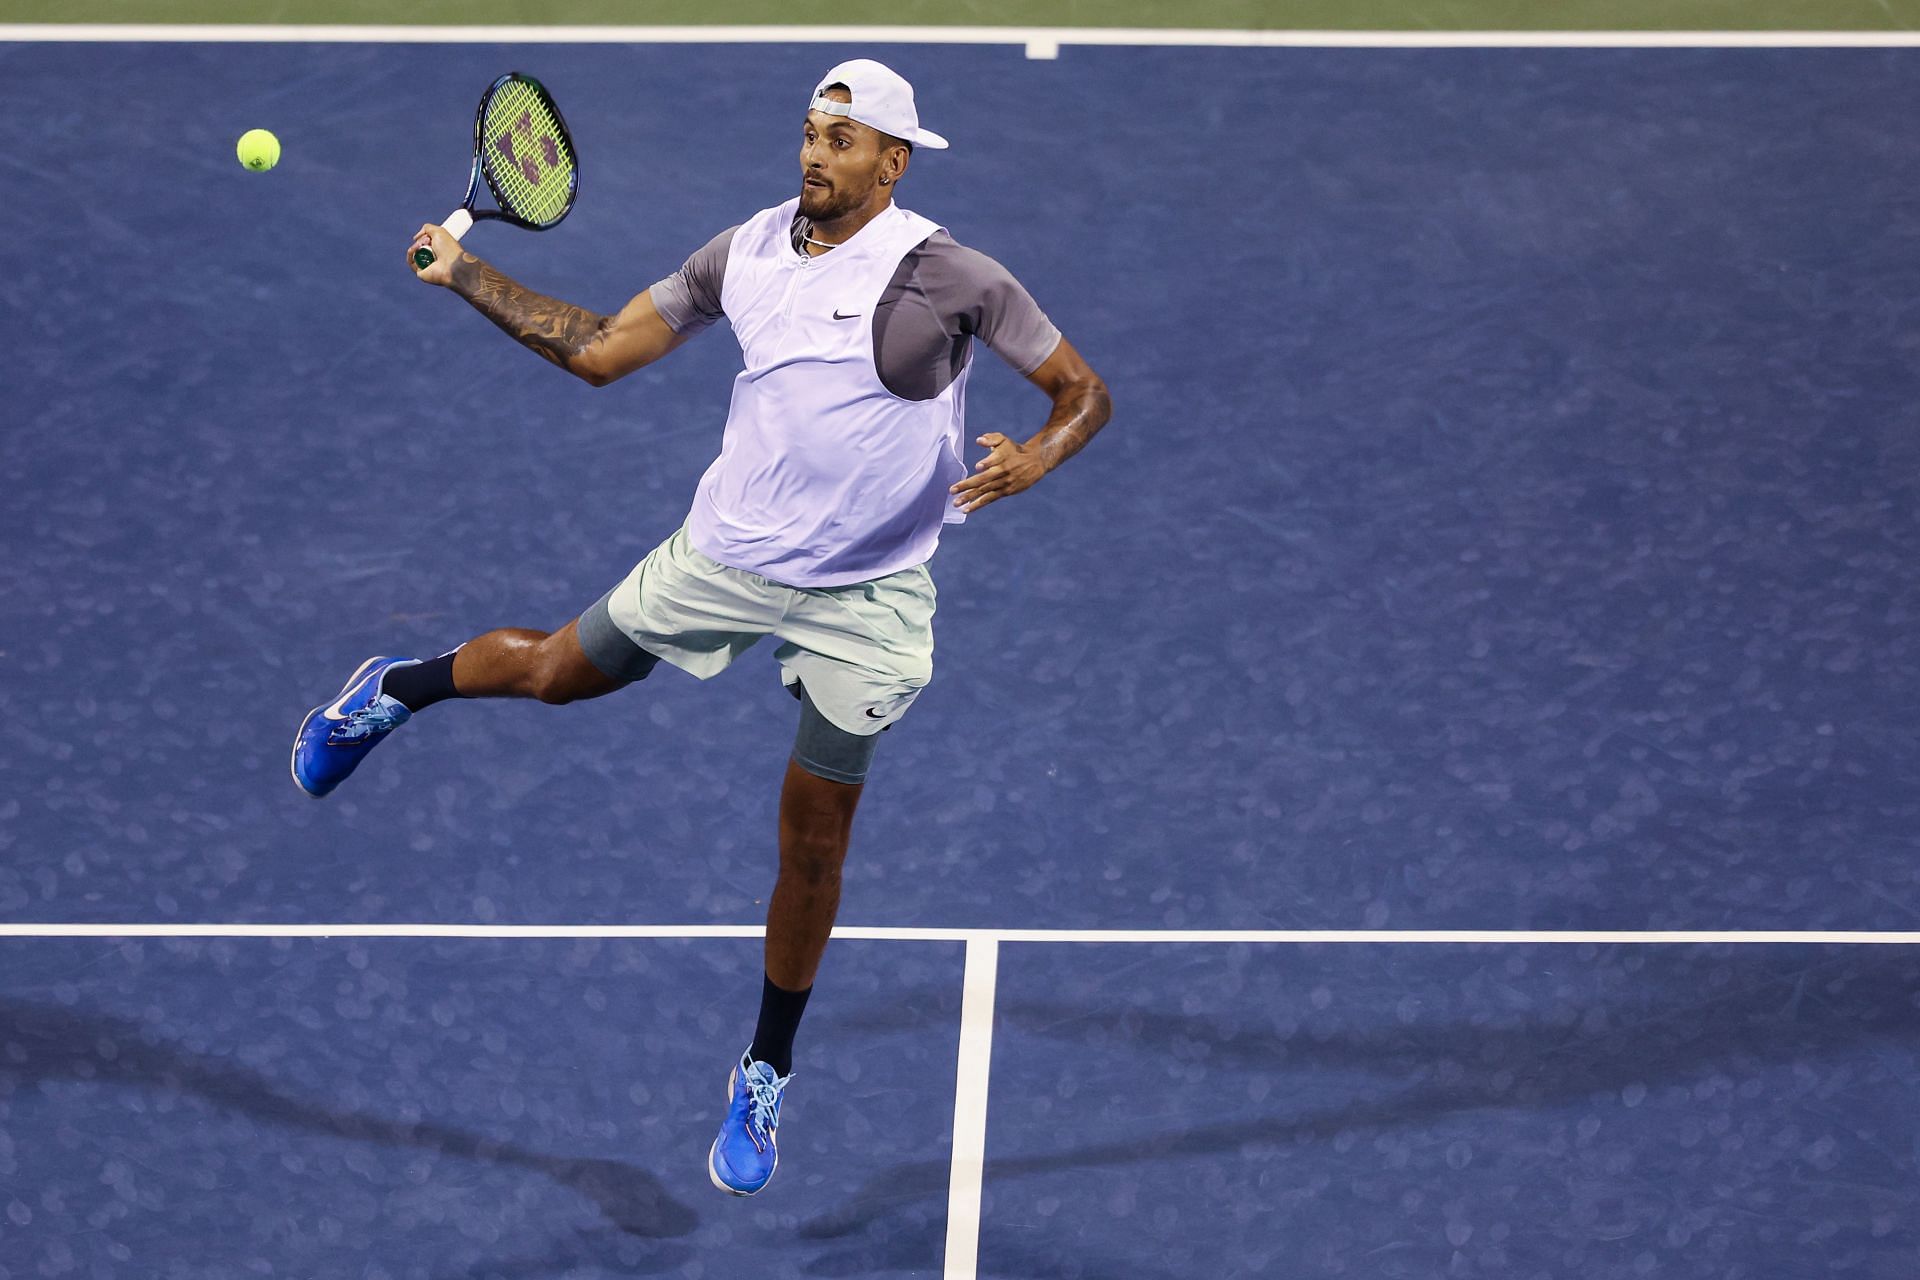 Nick Kyrgios is looking for his first title of the season.